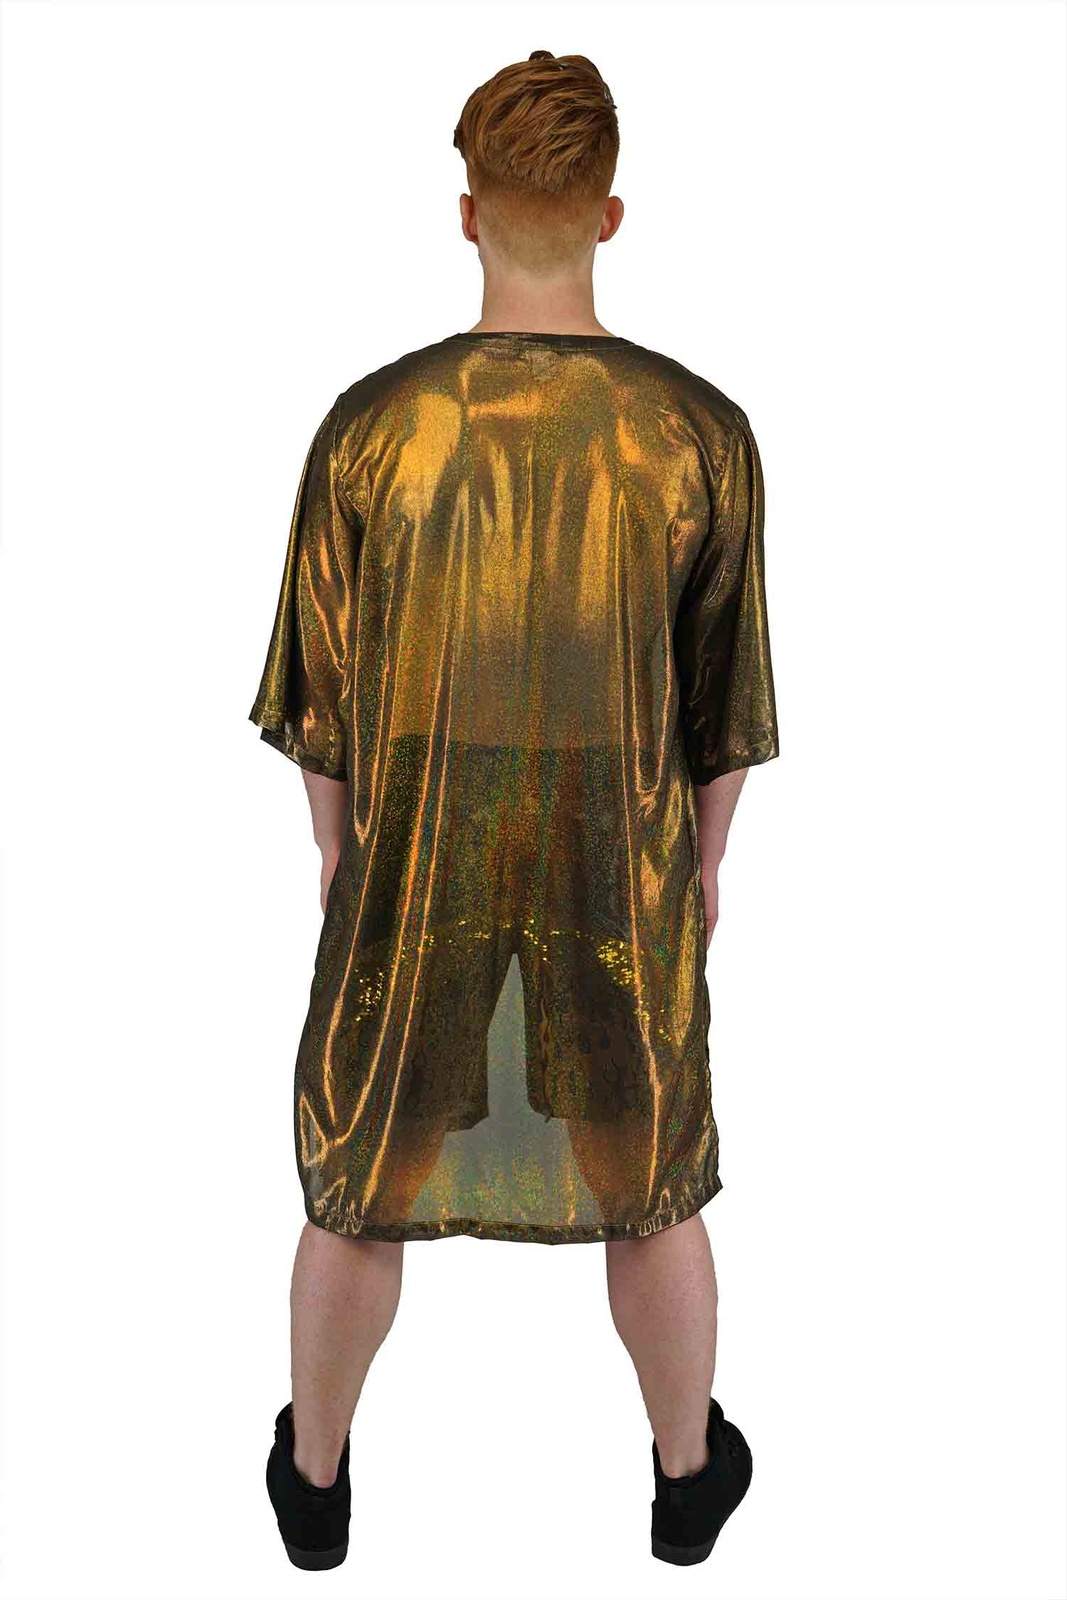 Man wearing a holographic gold kimono from Love Khaos